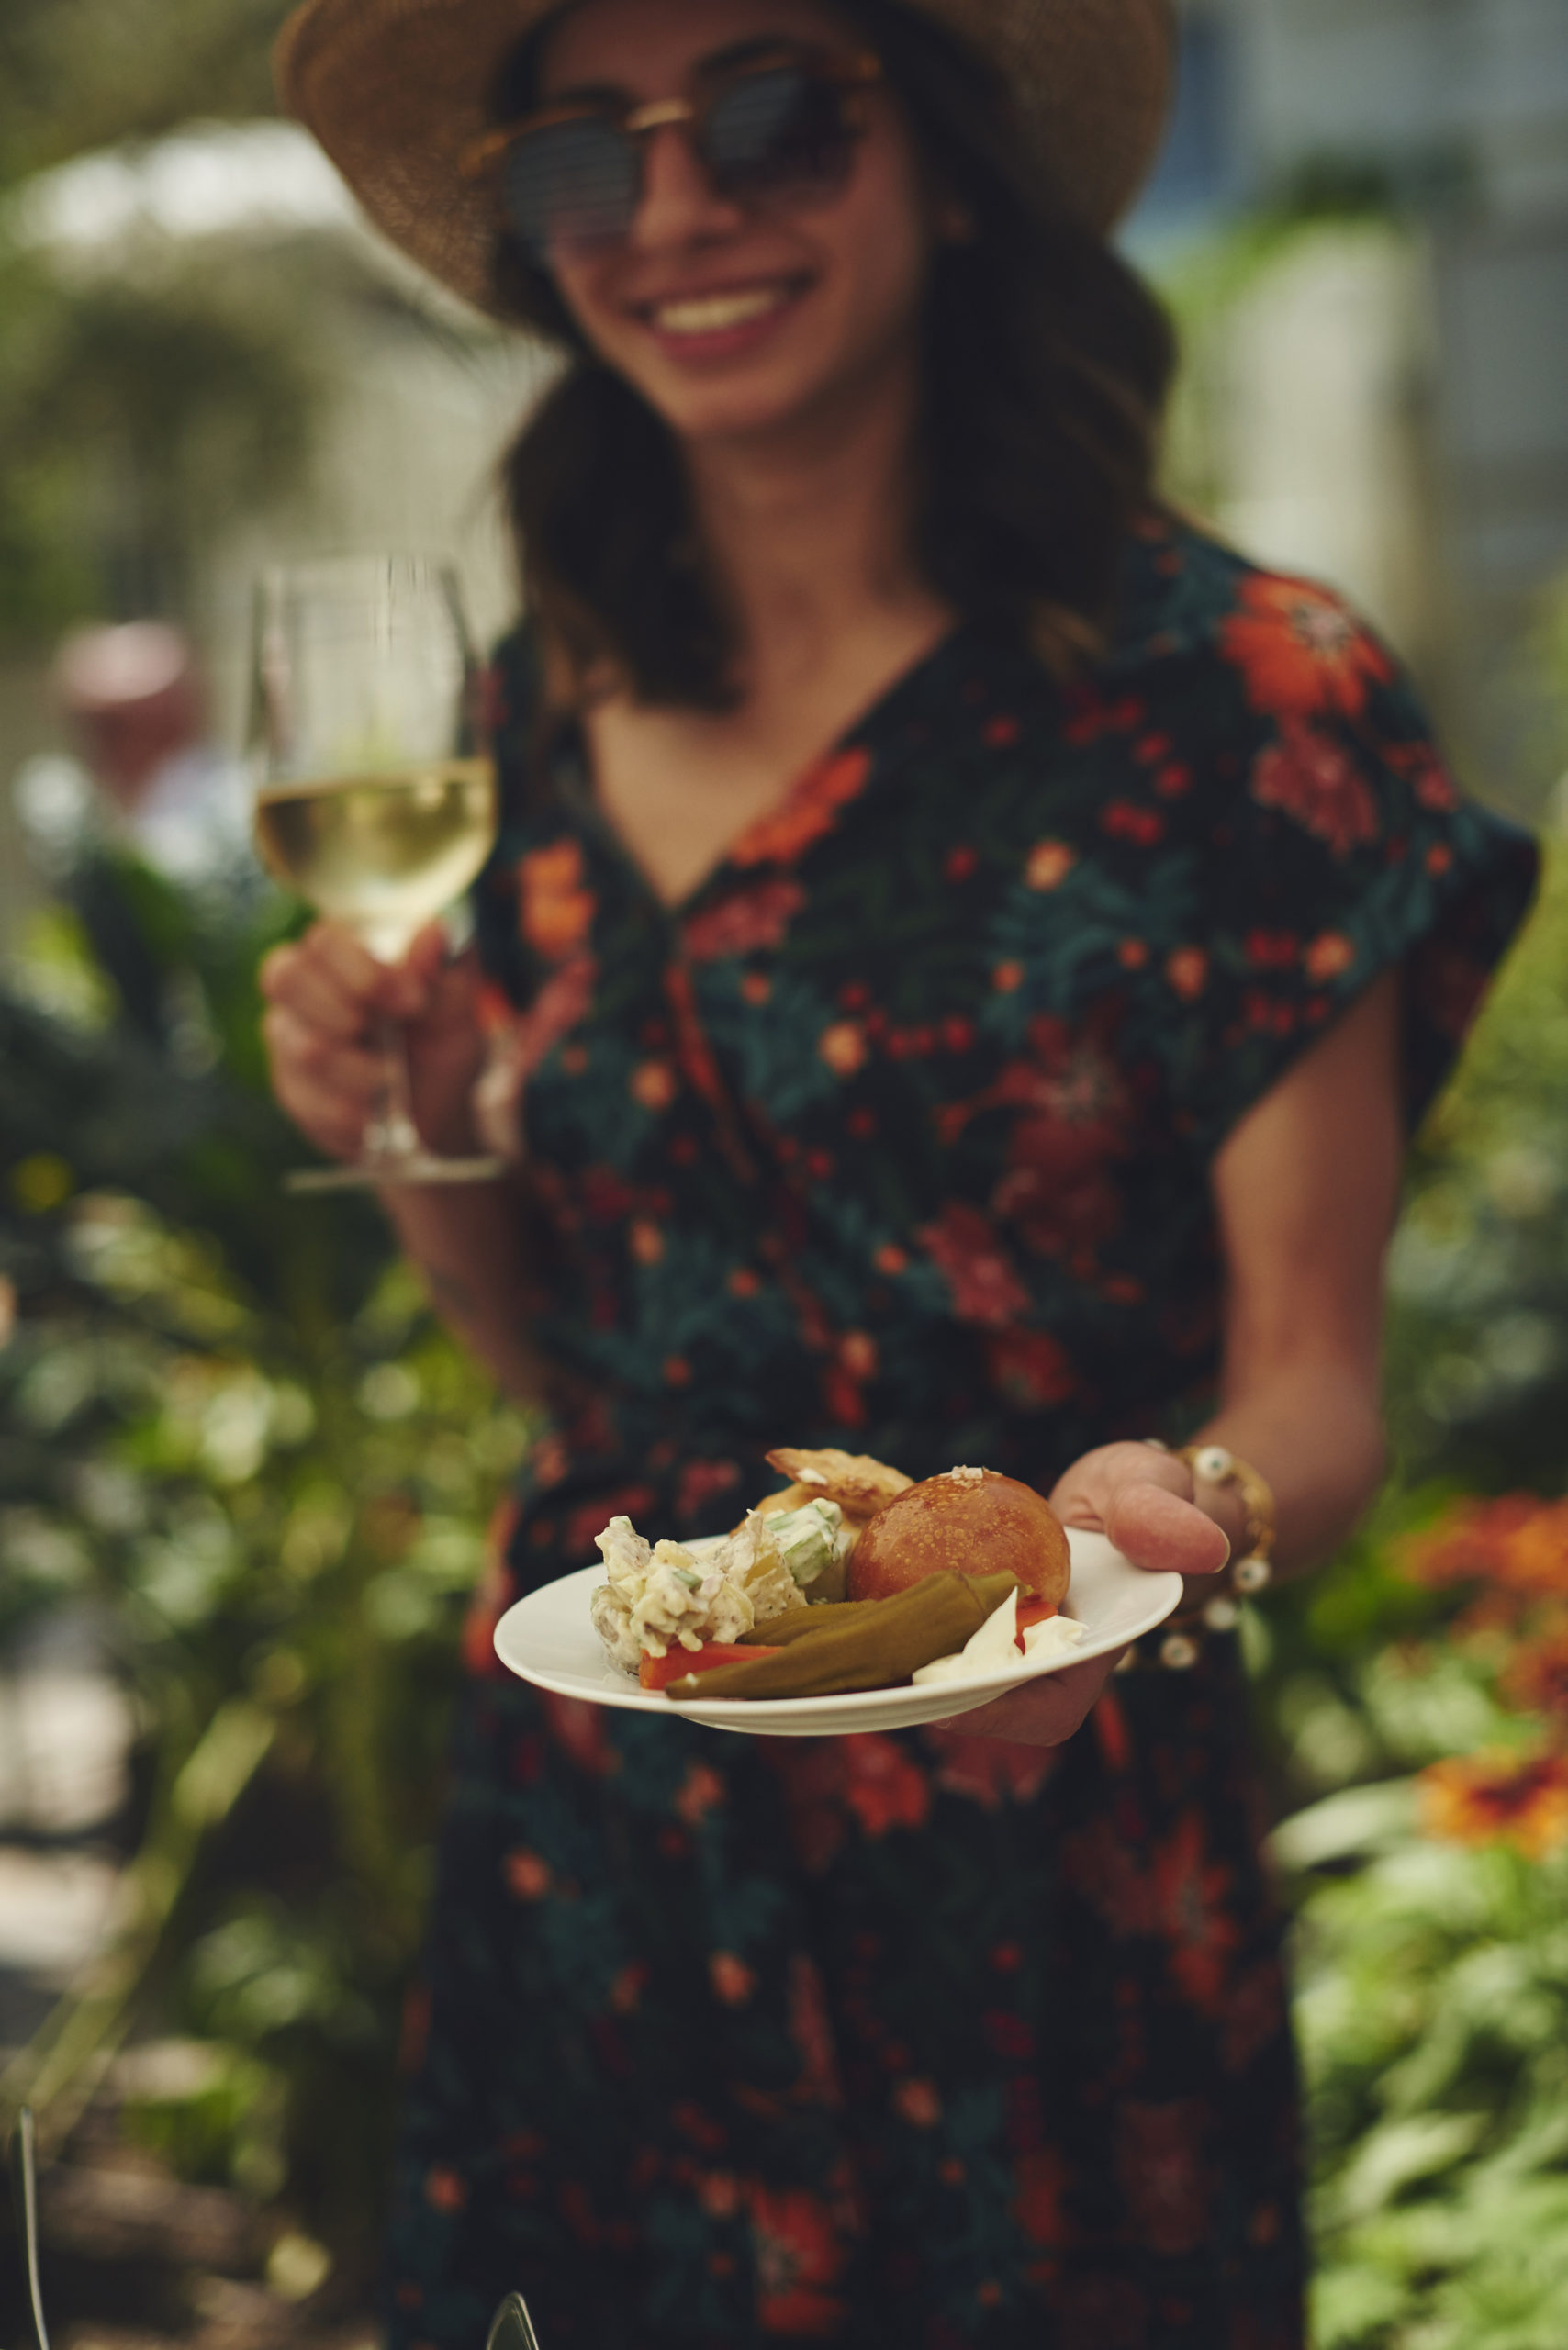 girl holding plate of food and glass of wine in colorful flower dress in a garden